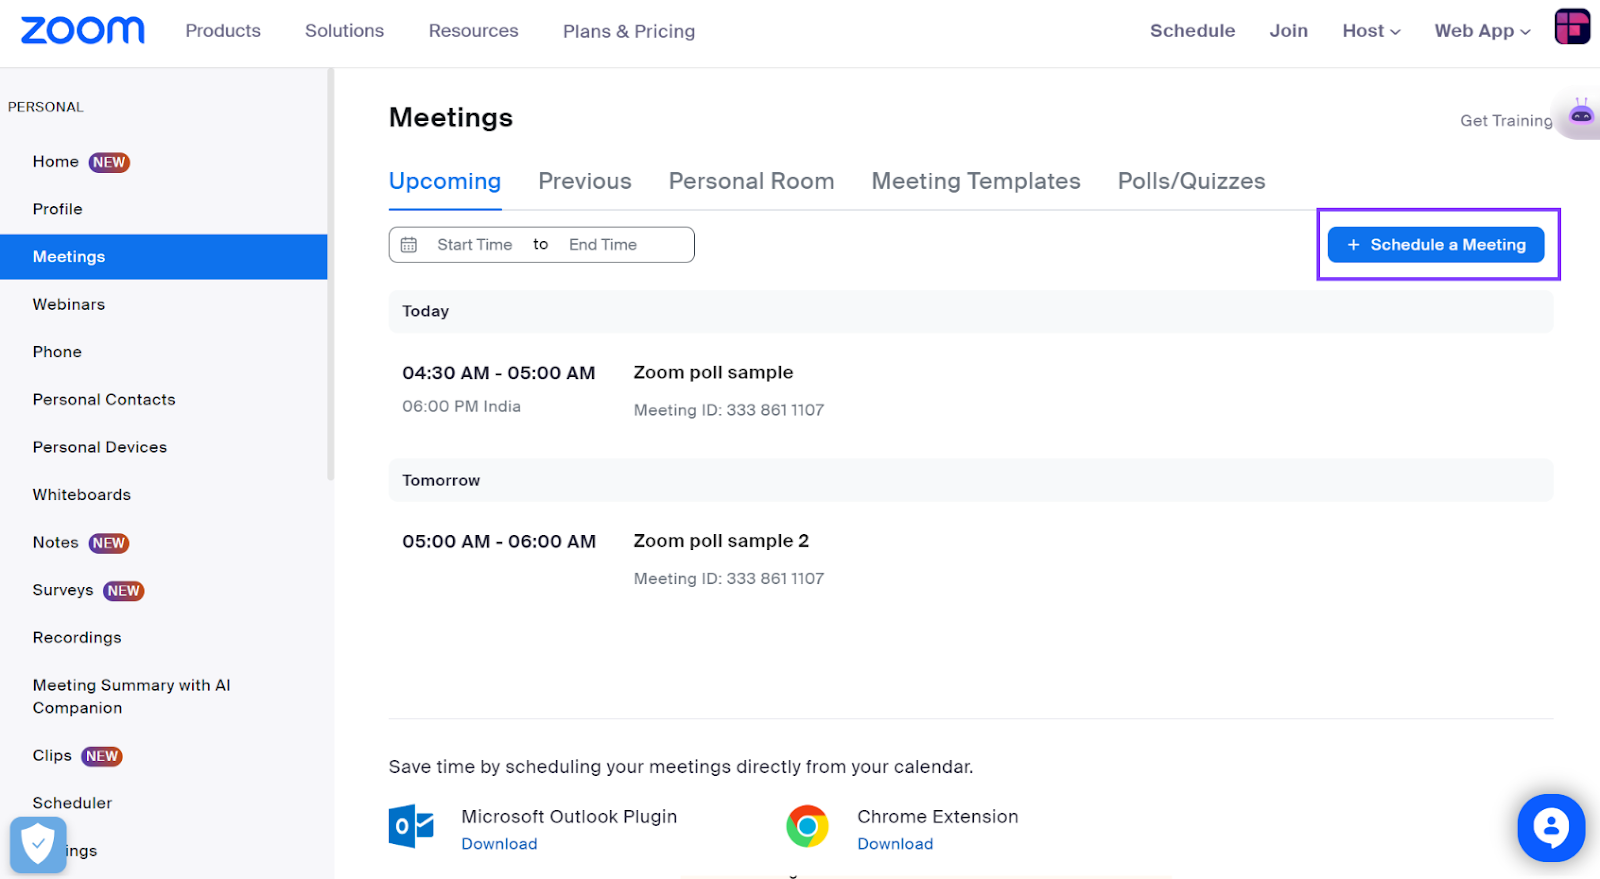 Create a meeting by clicking on Schedule a meeting